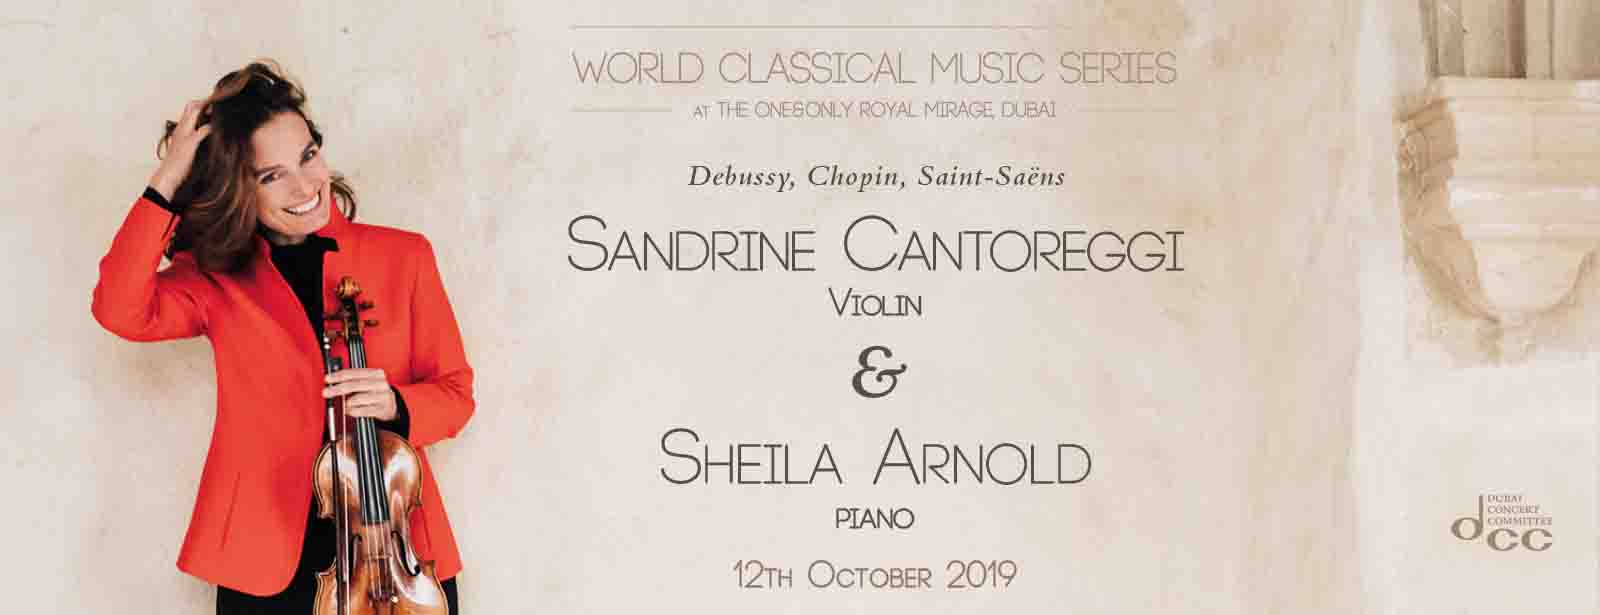 Sandrine Cantoreggi and Sheila Arnold – Violin and Piano Concert - Coming Soon in UAE